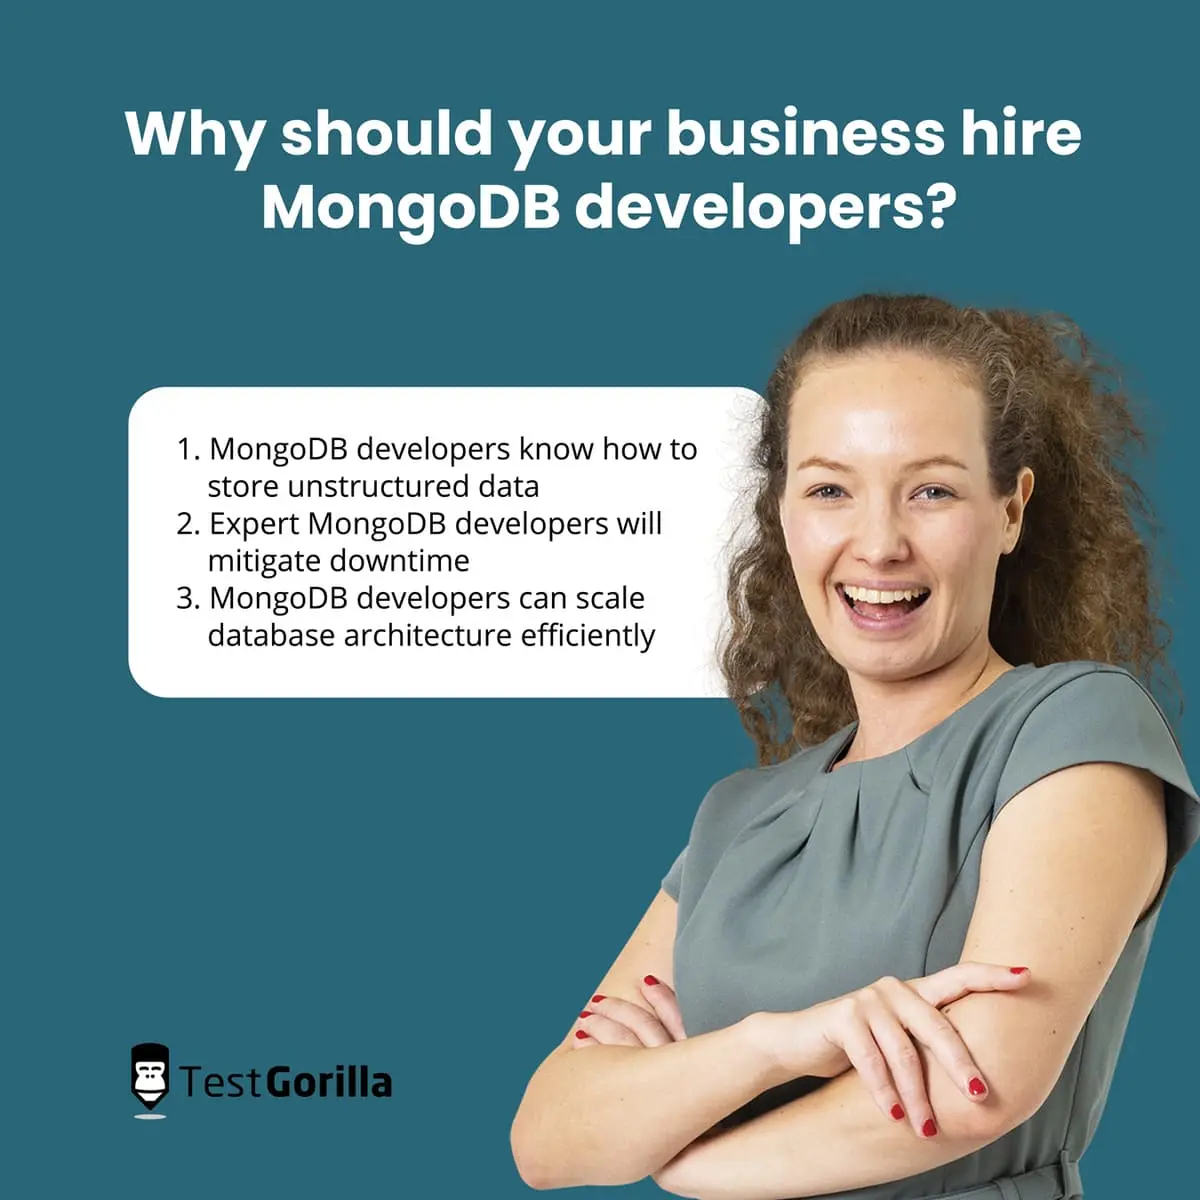 image showing why your business should hire MongoDB developers